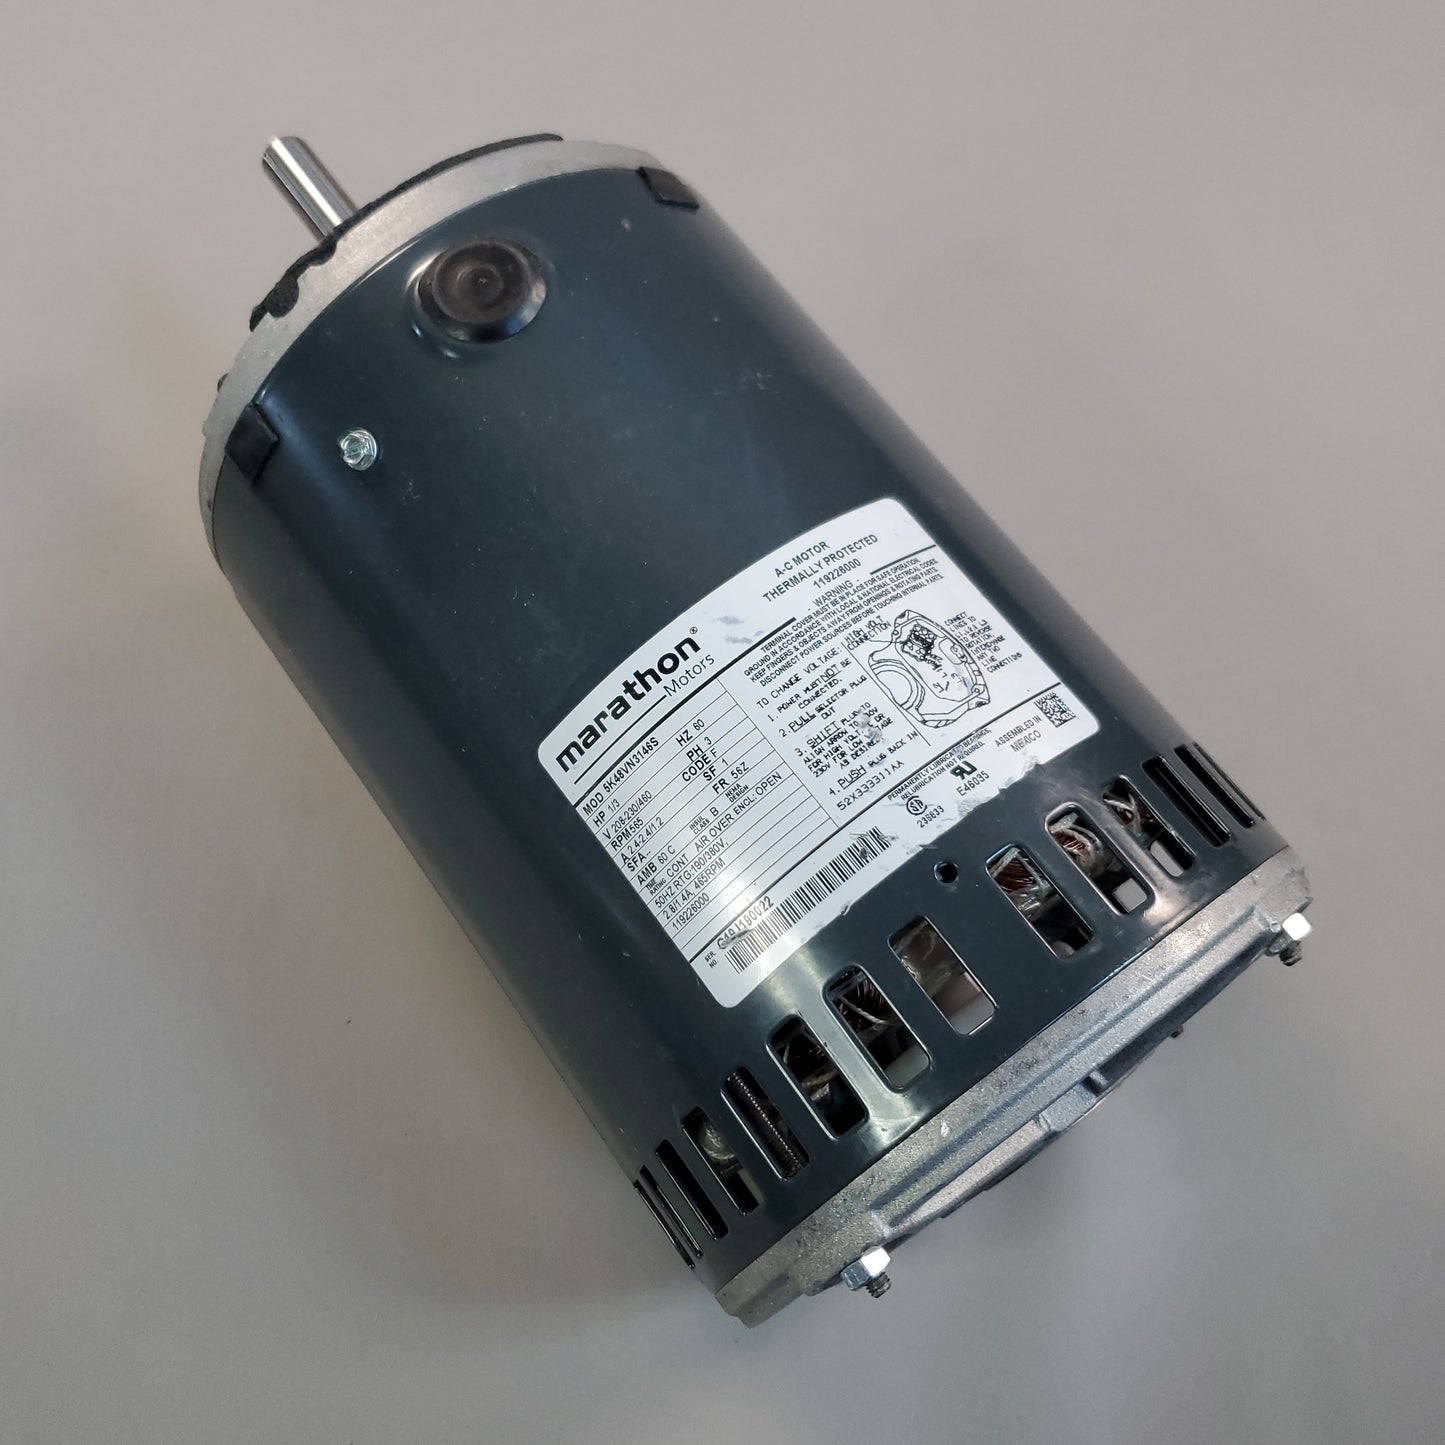 MARATHON MOTORS Electrical AC Motor 1/3 HP 3 Phase 5K48VN3146S 119226000 (New Other)